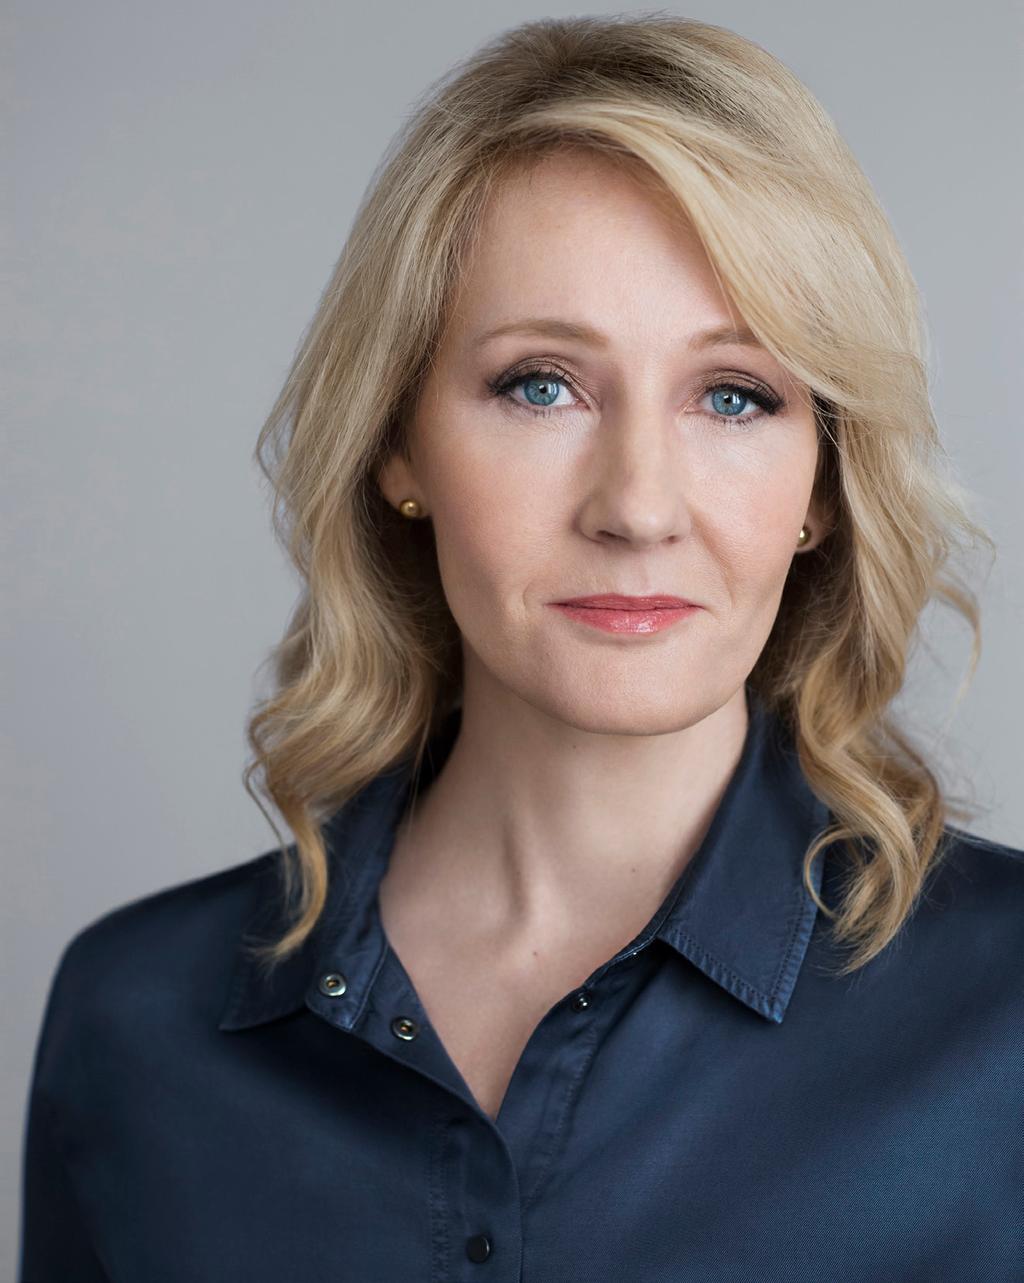 YOU CANNOT MAKE IT THROUGH WITHOUT INSPIRATION AND FAITH Consider JK Rowling who rose against all the odds to write and have the Harry Potter series published.